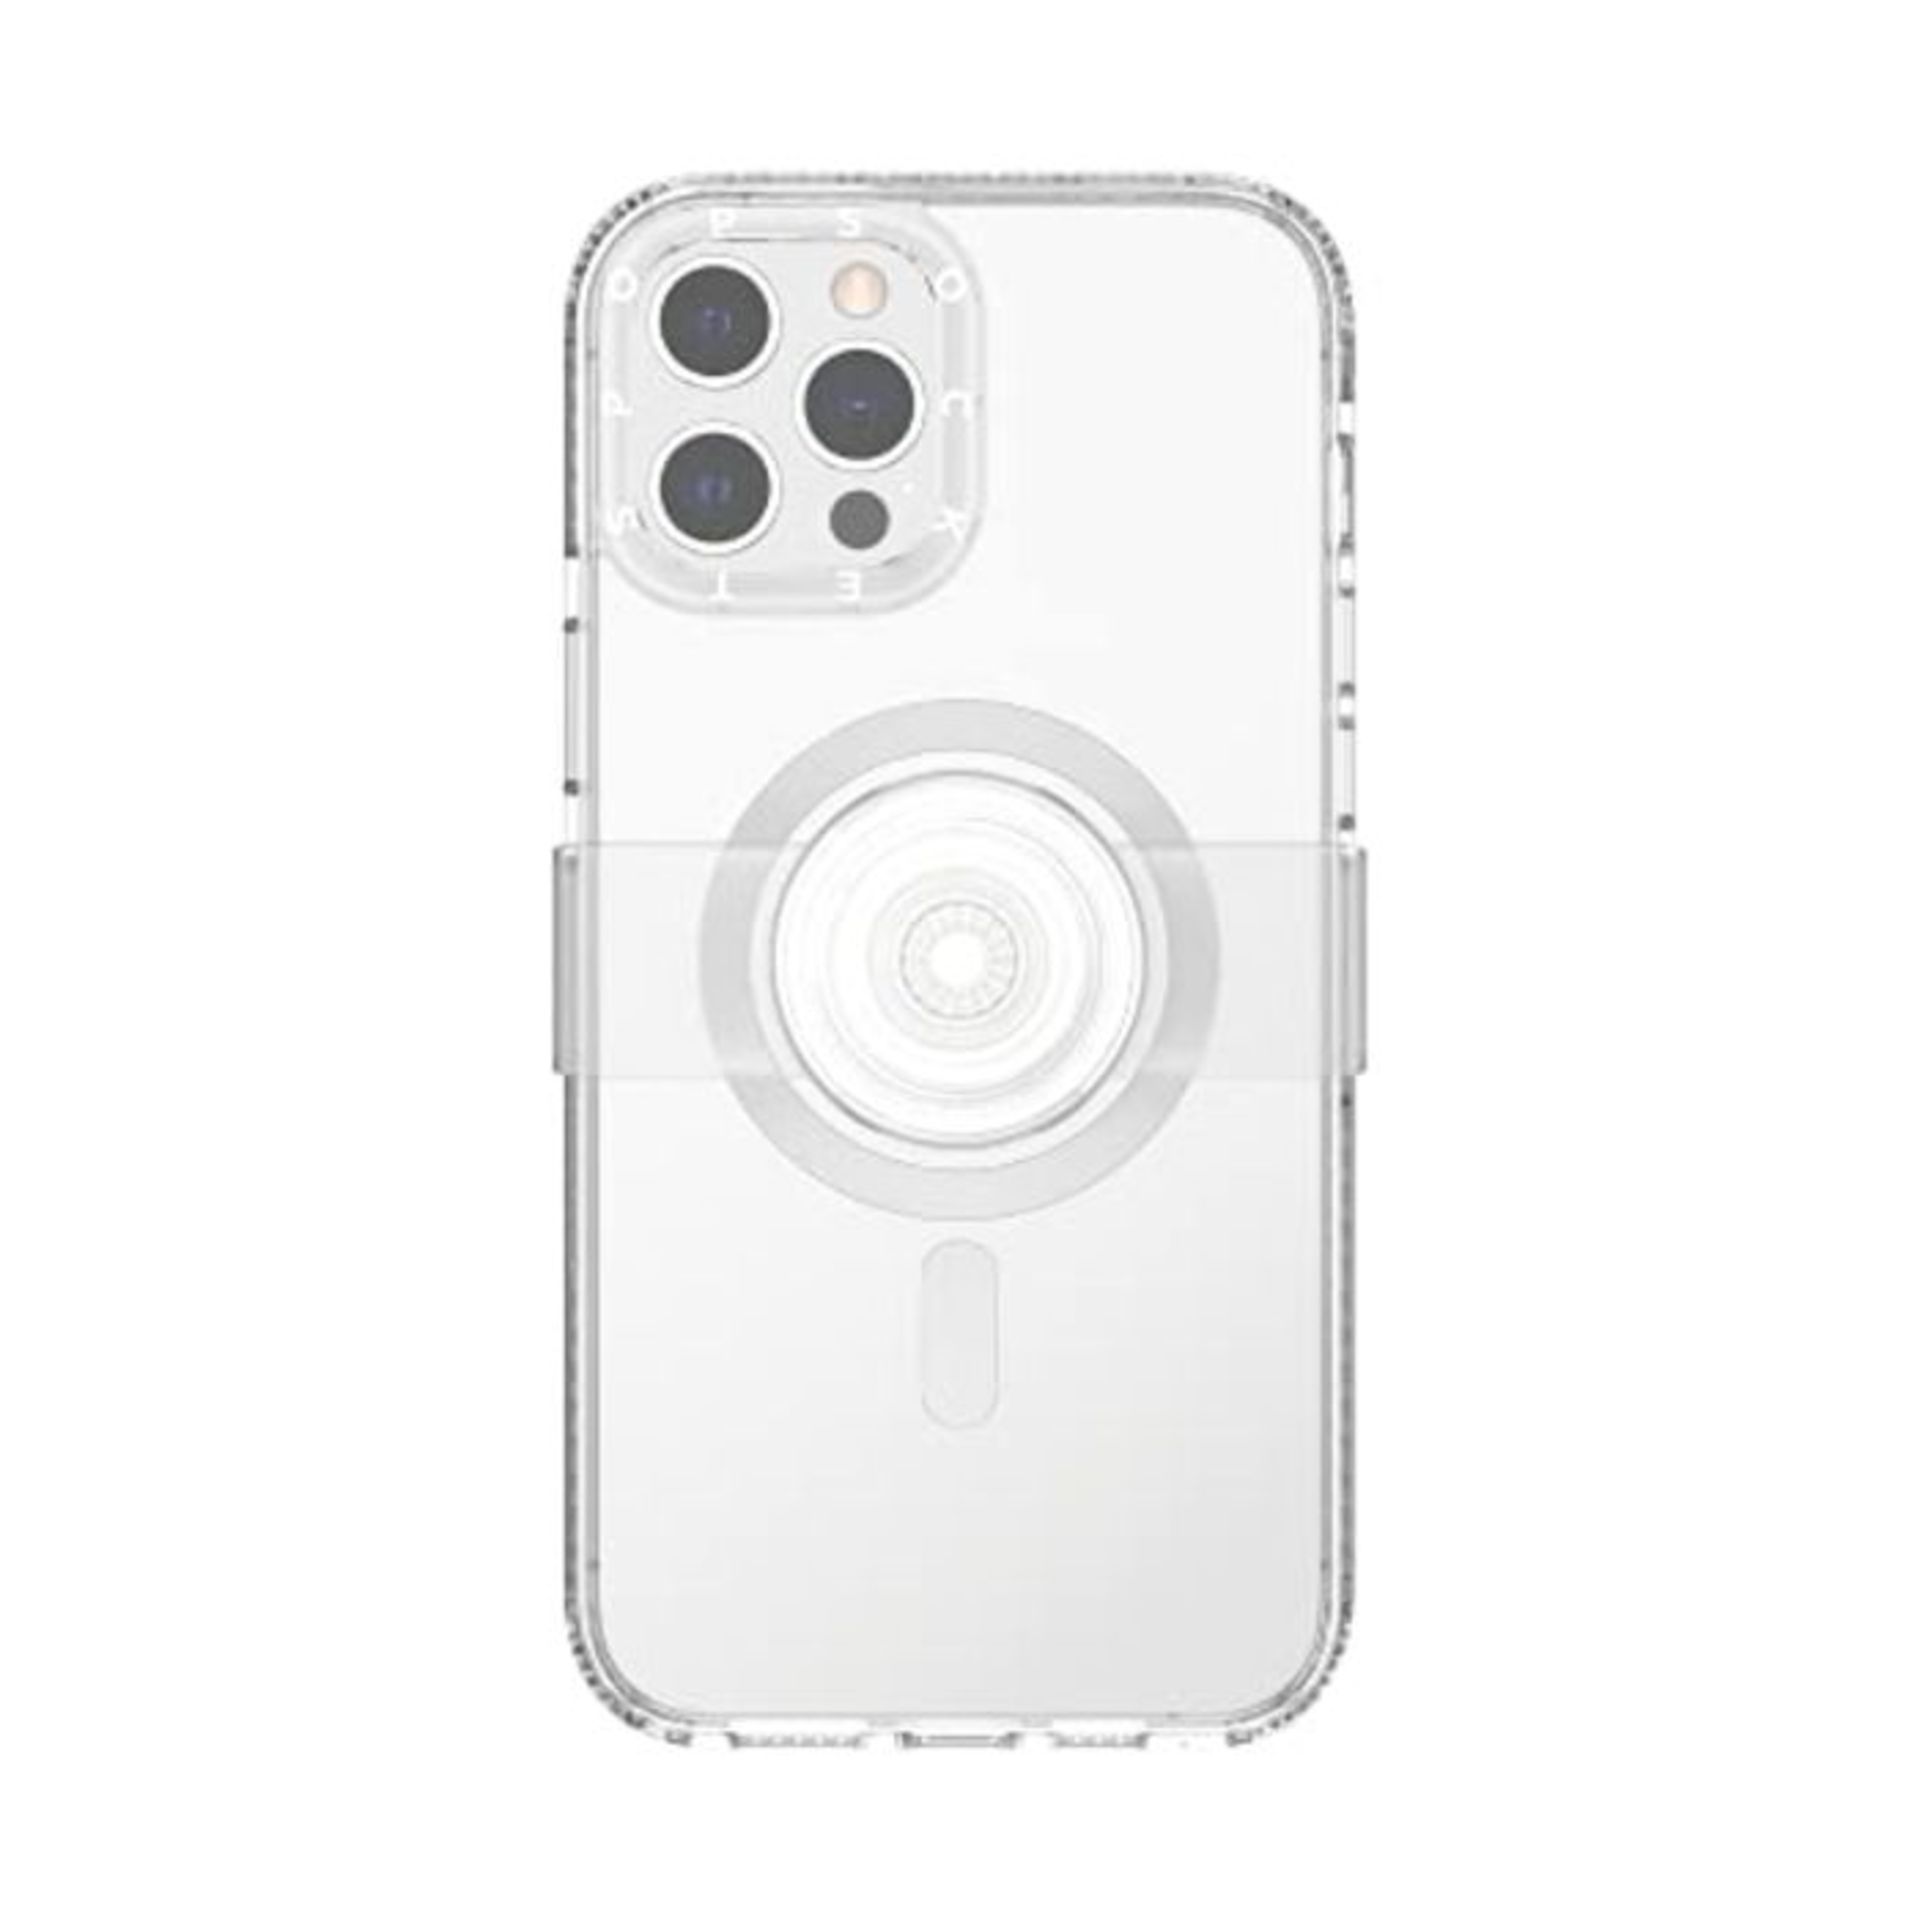 PopSockets: PopCase MagSafe Phone Case for iPhone 12 Pro Max with a Repositionable Pop